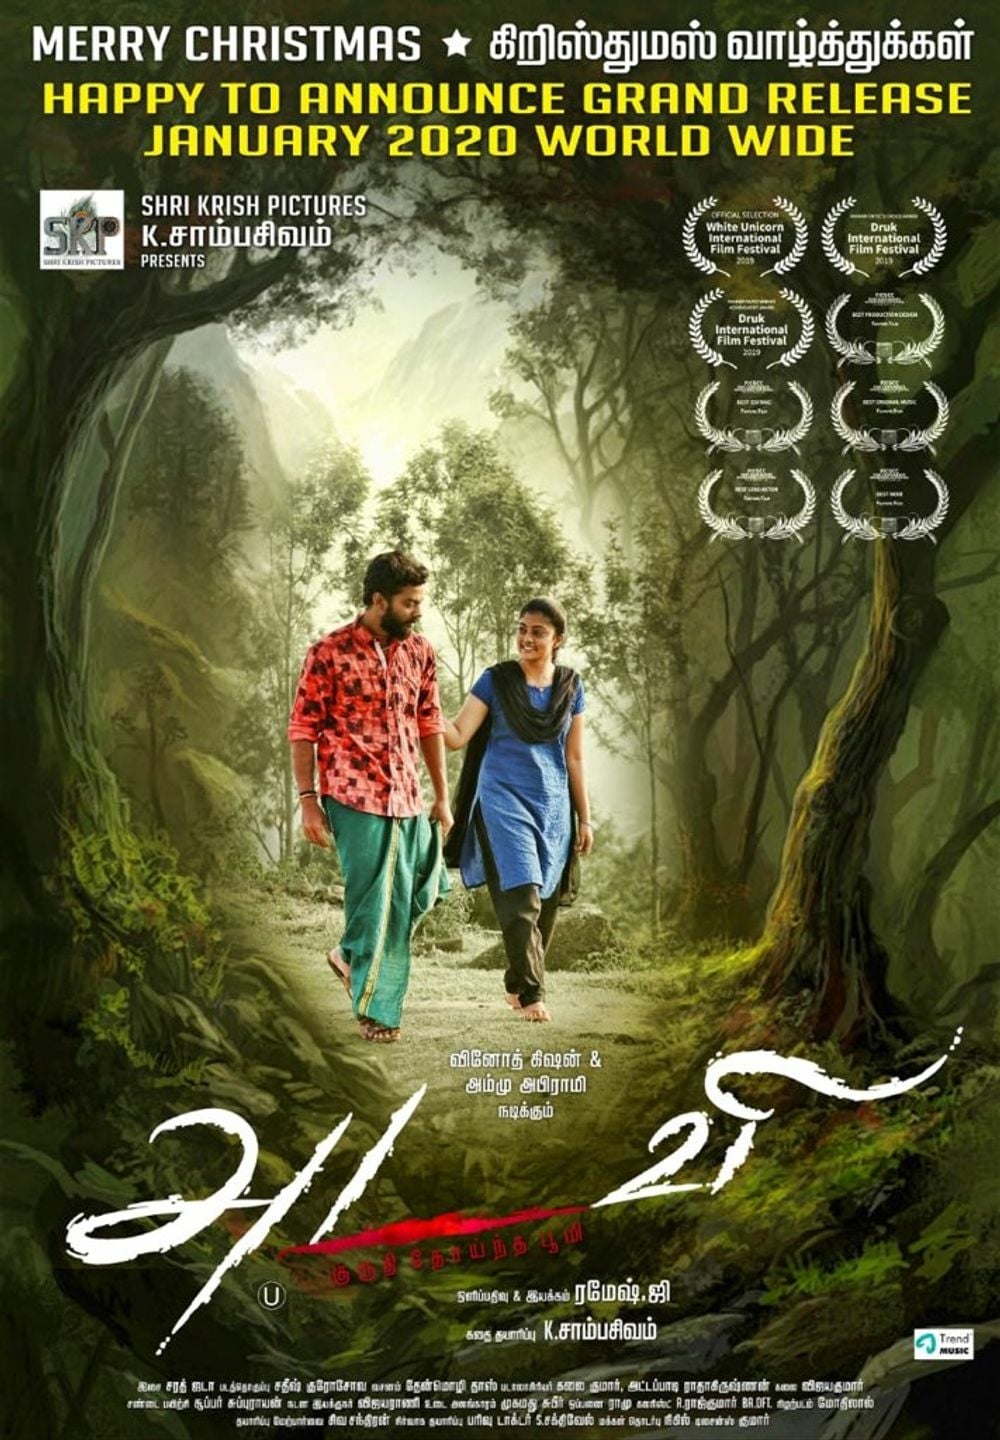 Poster for the movie "Adavi"